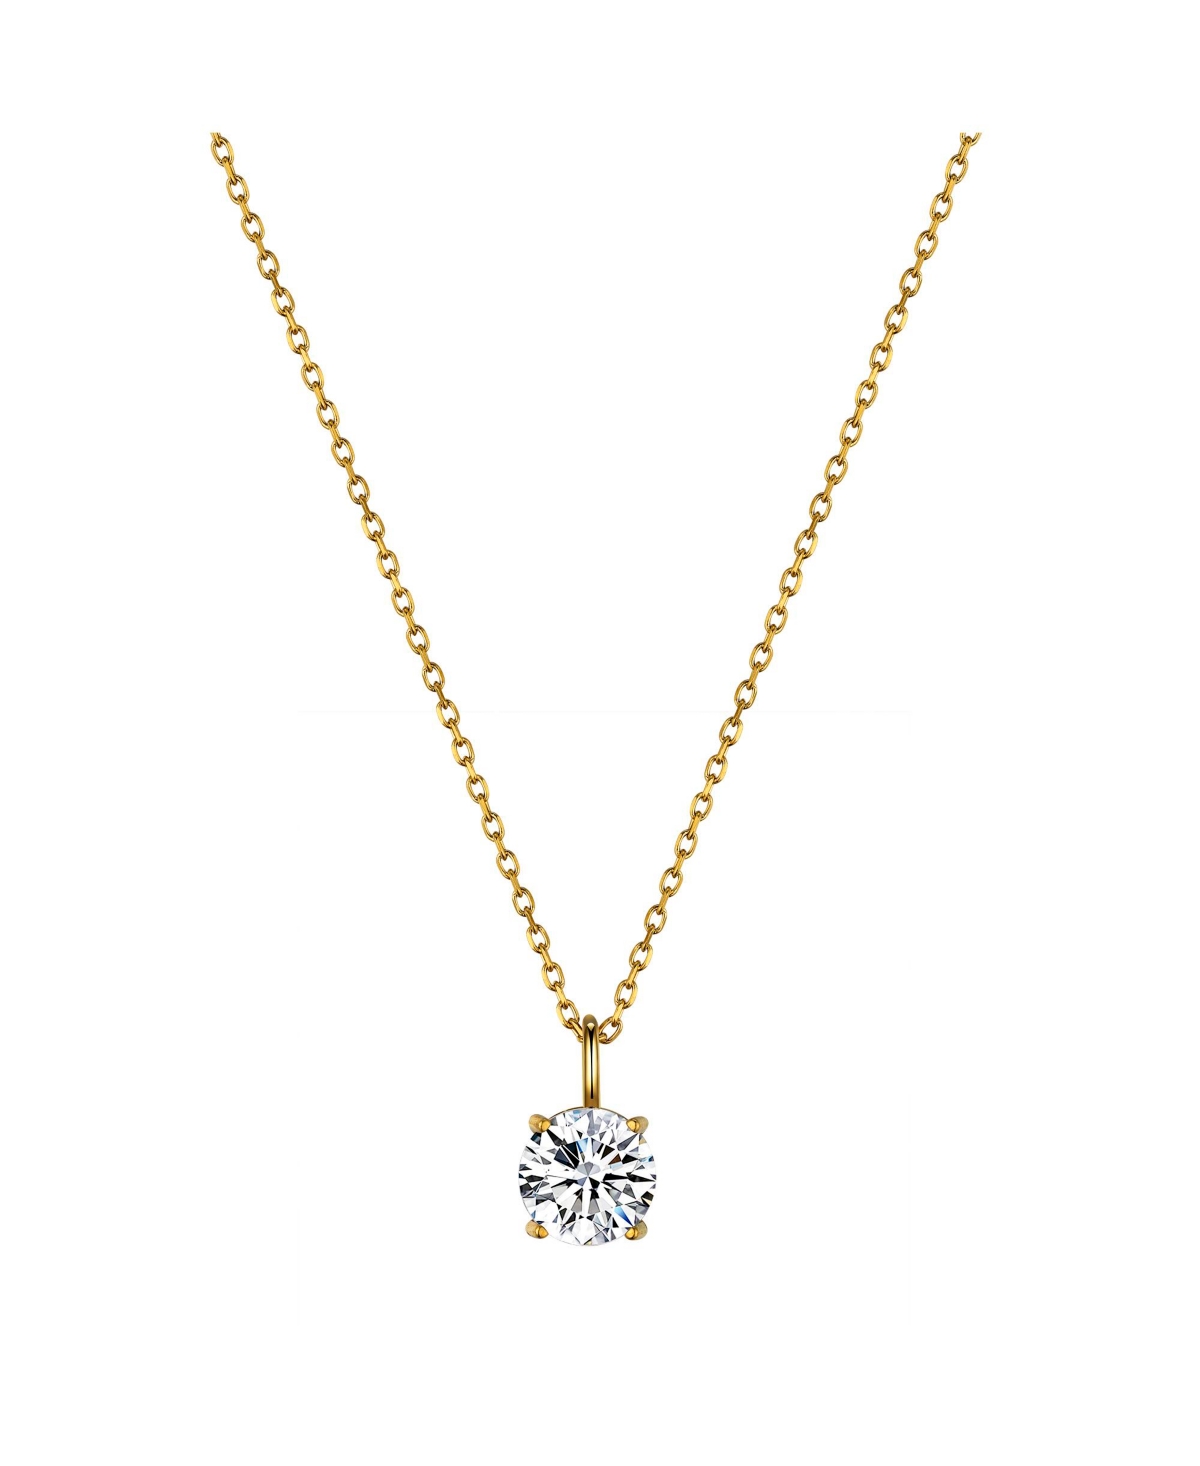 Modasport Clear Cubic Zirconia Round Pendant Necklace In Gold